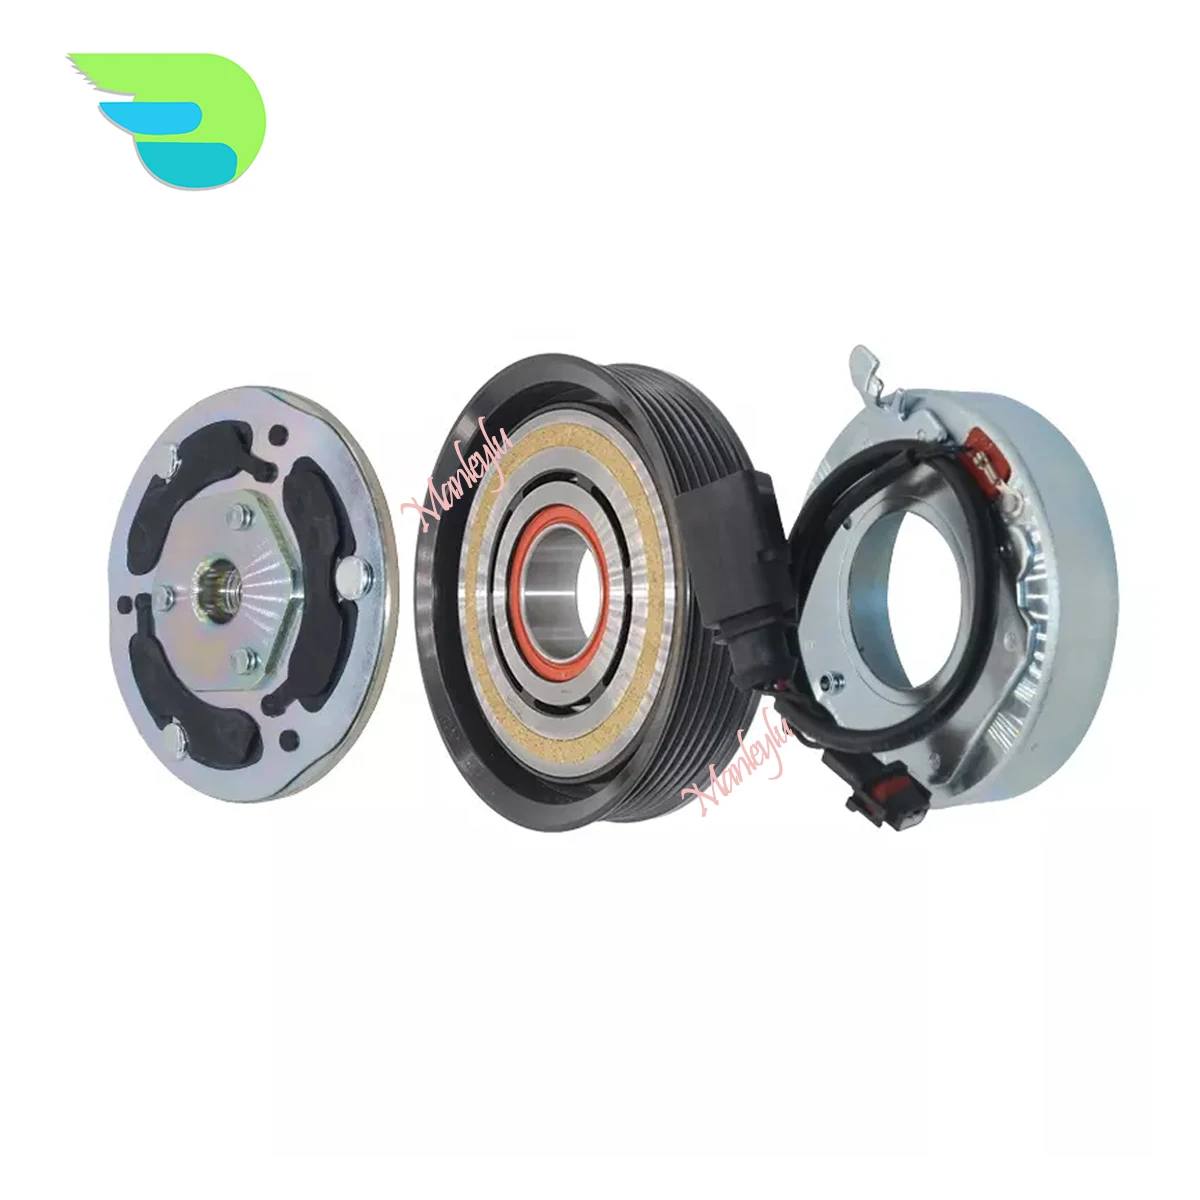 

AC A/C Air Conditioning Conditioner Compressor Magnetic Clutch Pulley 6SAS14C For Audi A6 C7 2.5